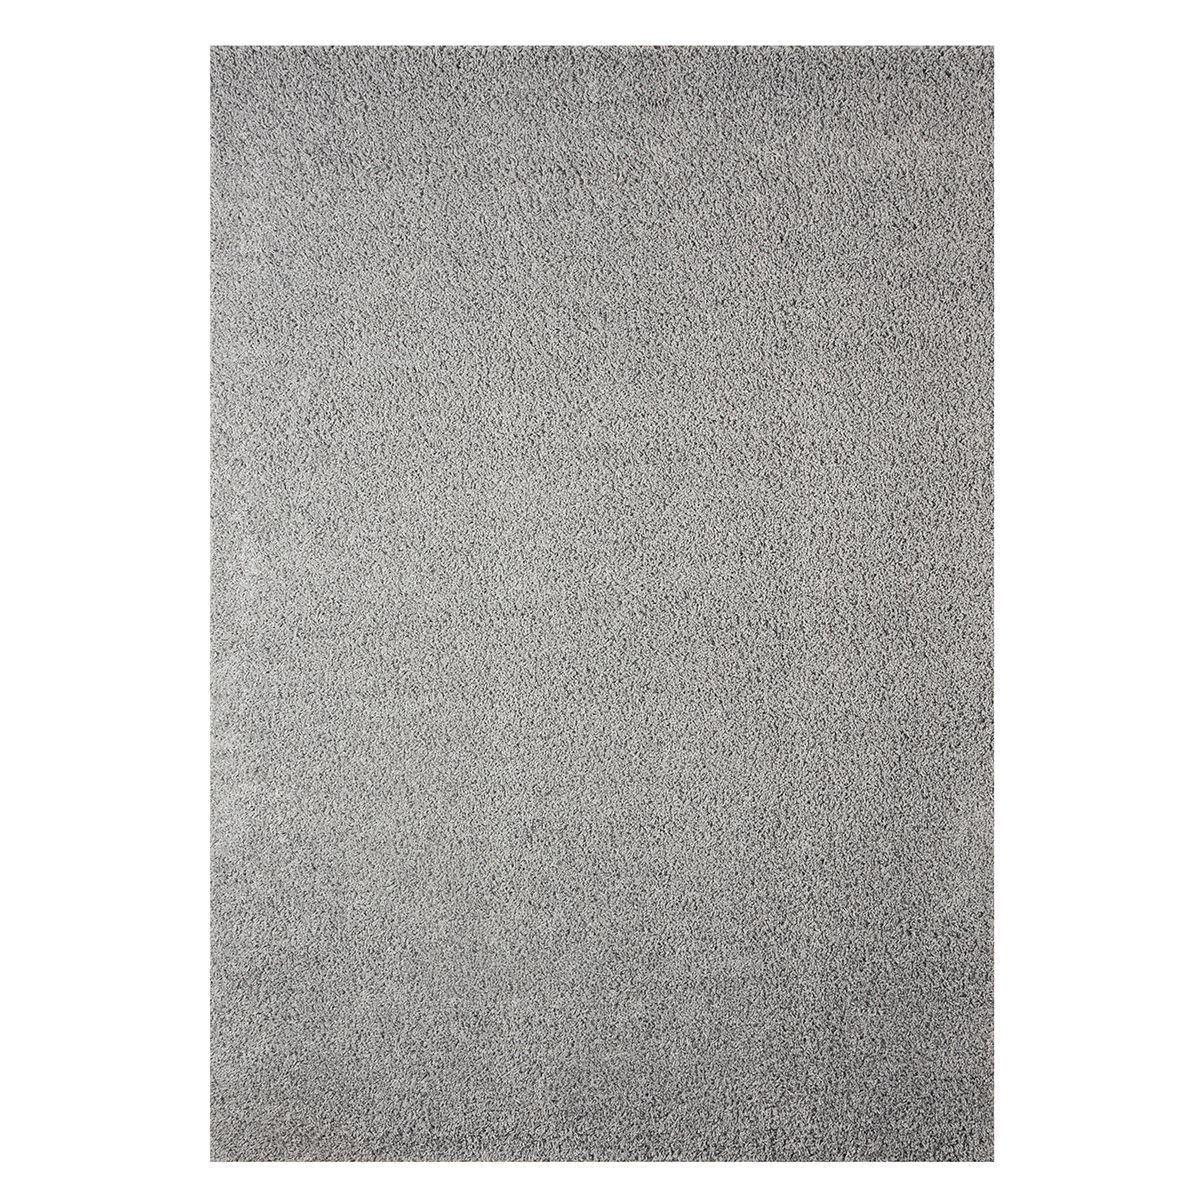 Picture of Caci Grey 5X7 Area Rug